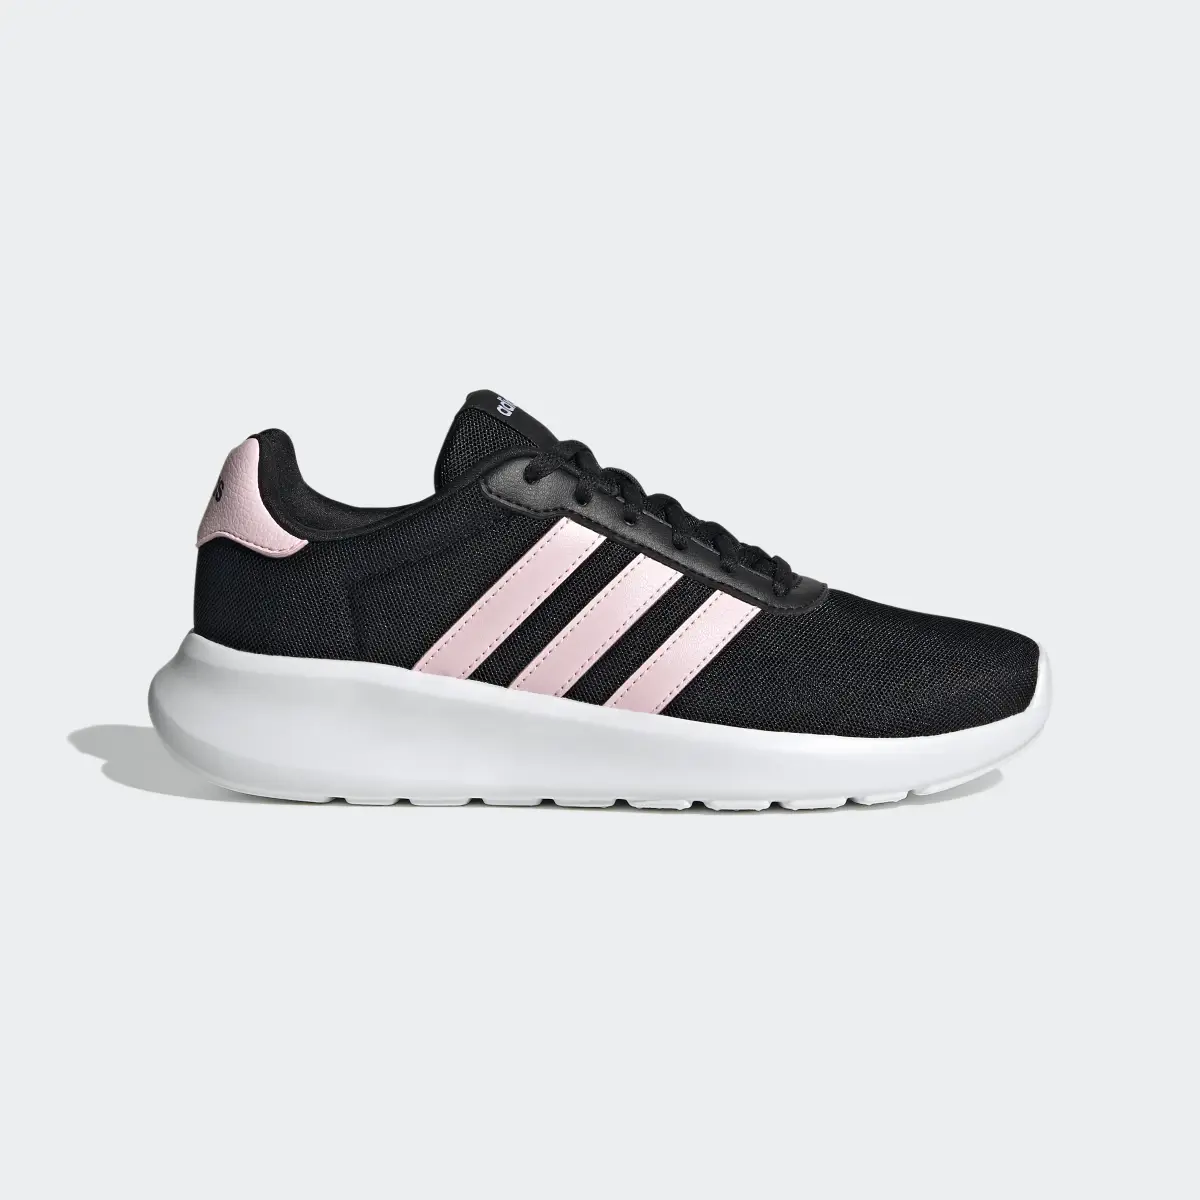 Adidas Lite Racer 3.0 Shoes. 2